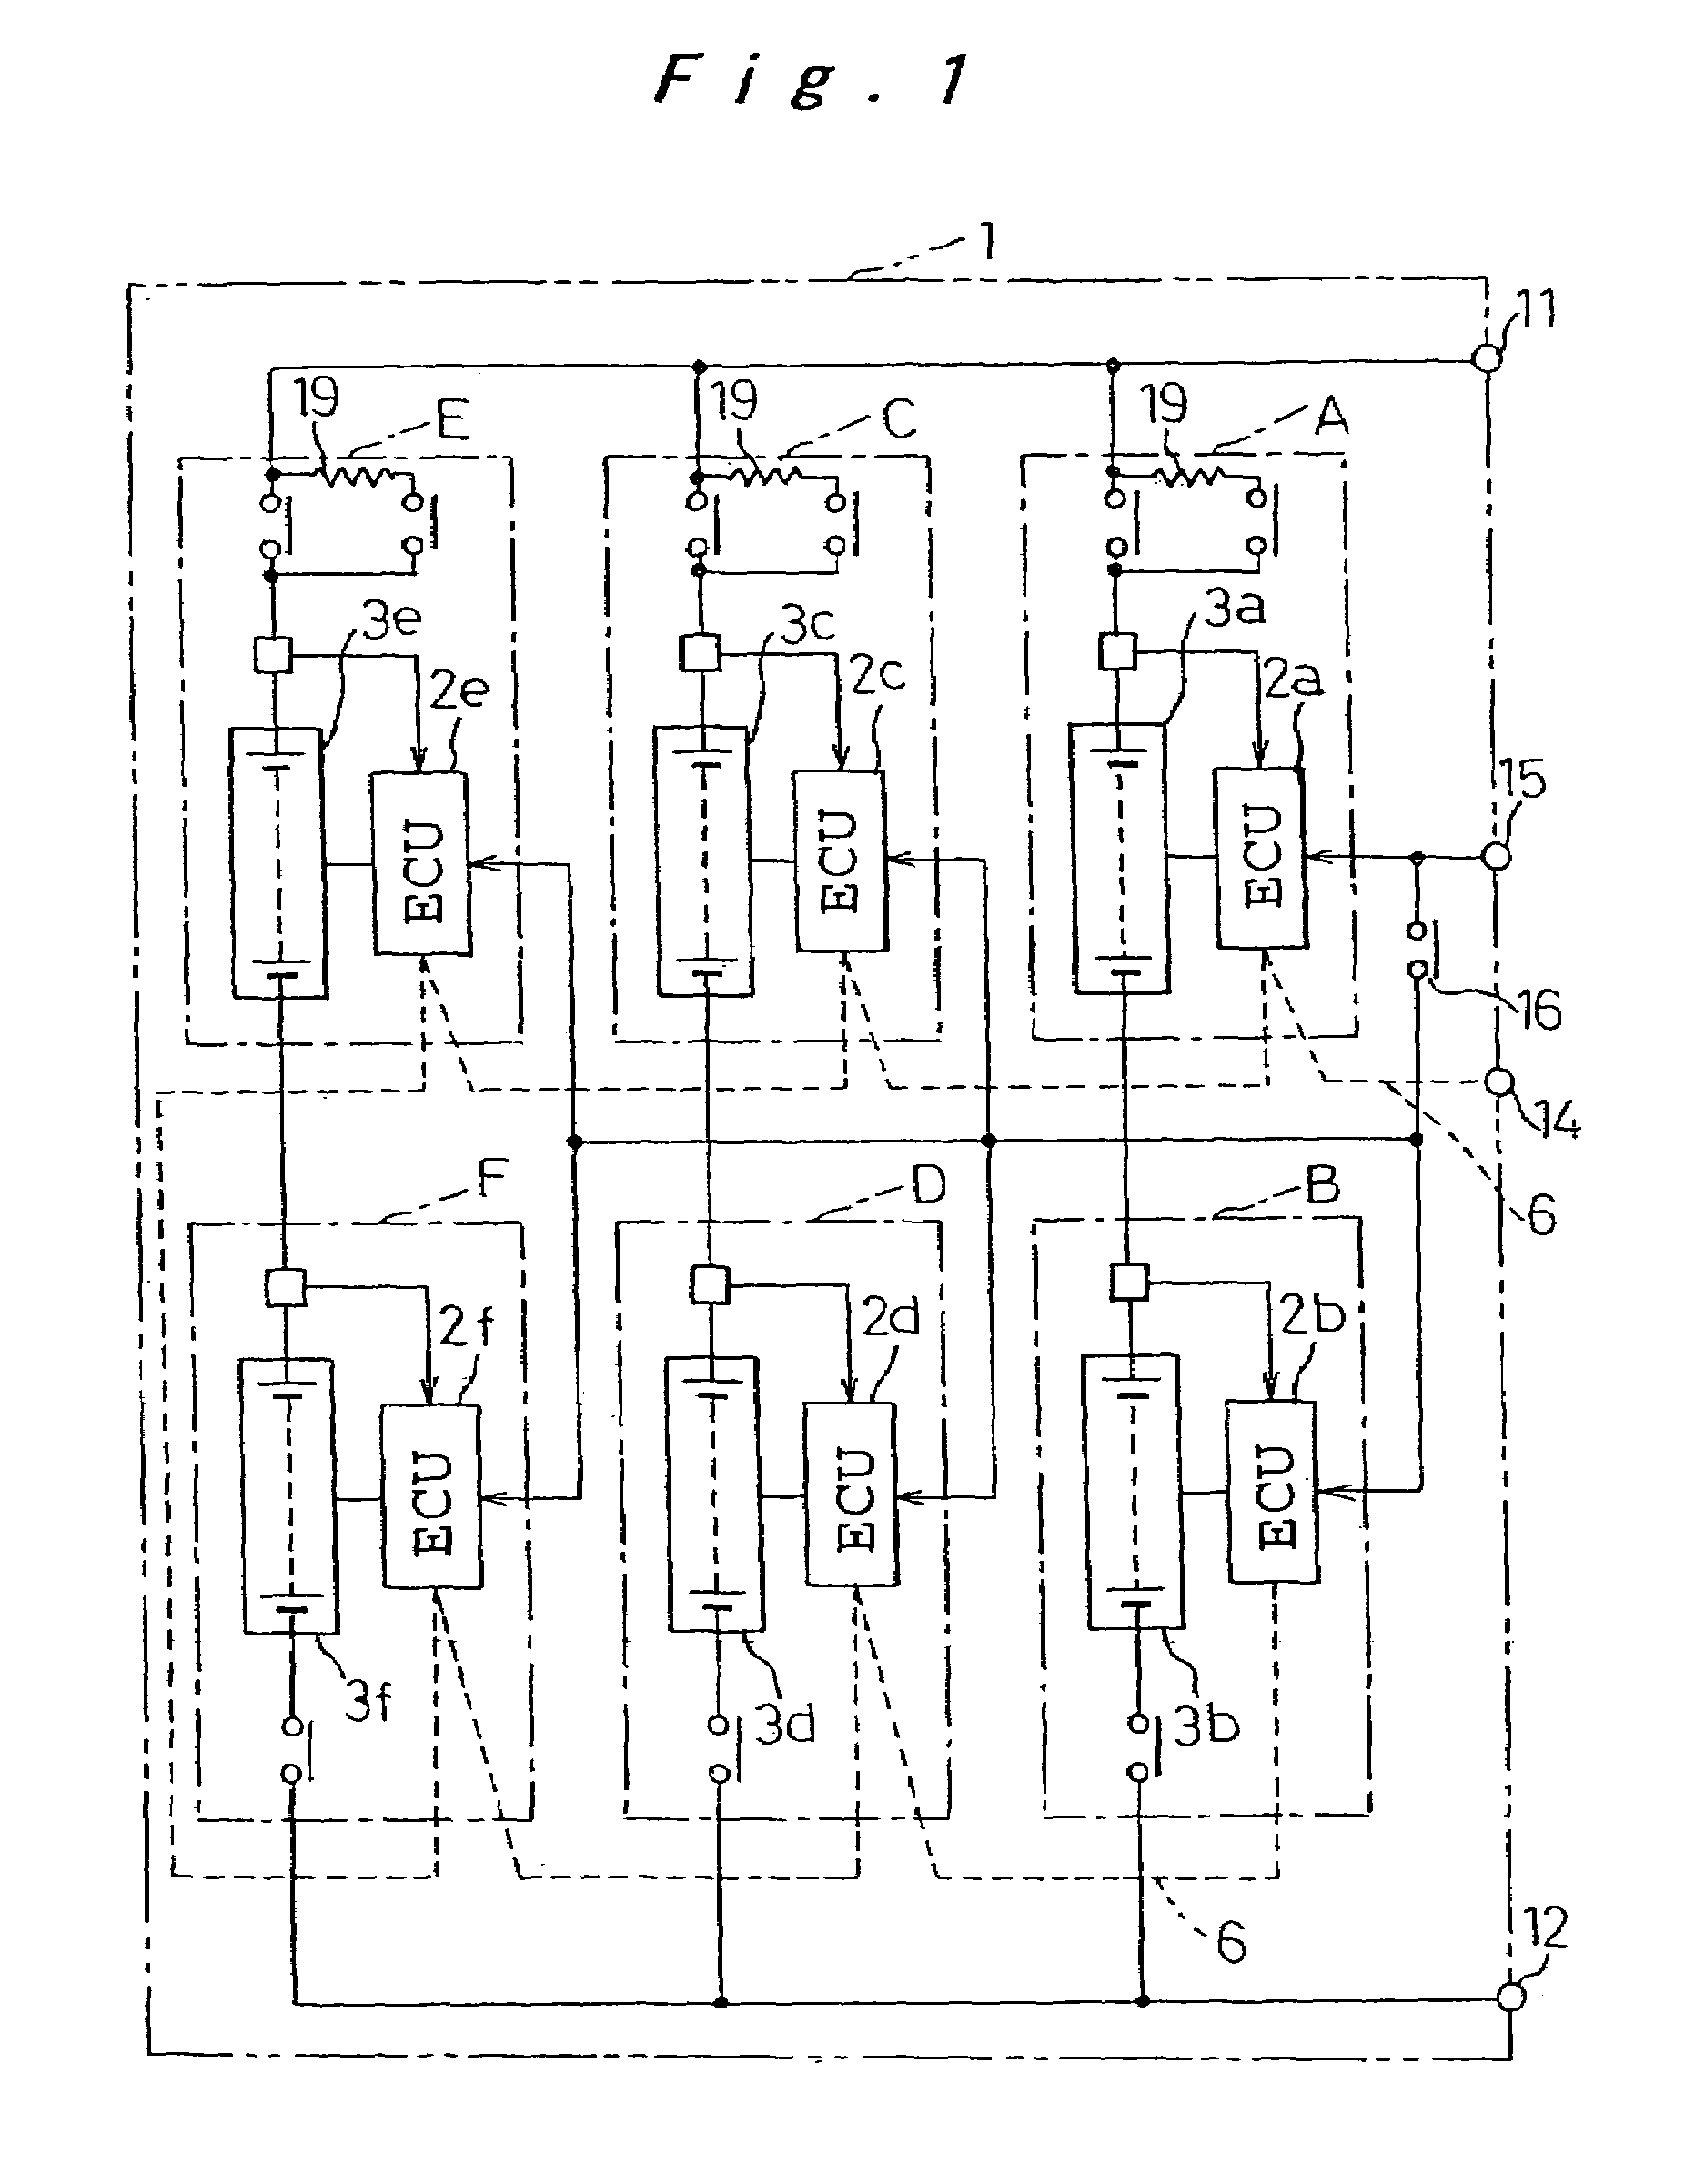 Battery power source device of electric power vehicle